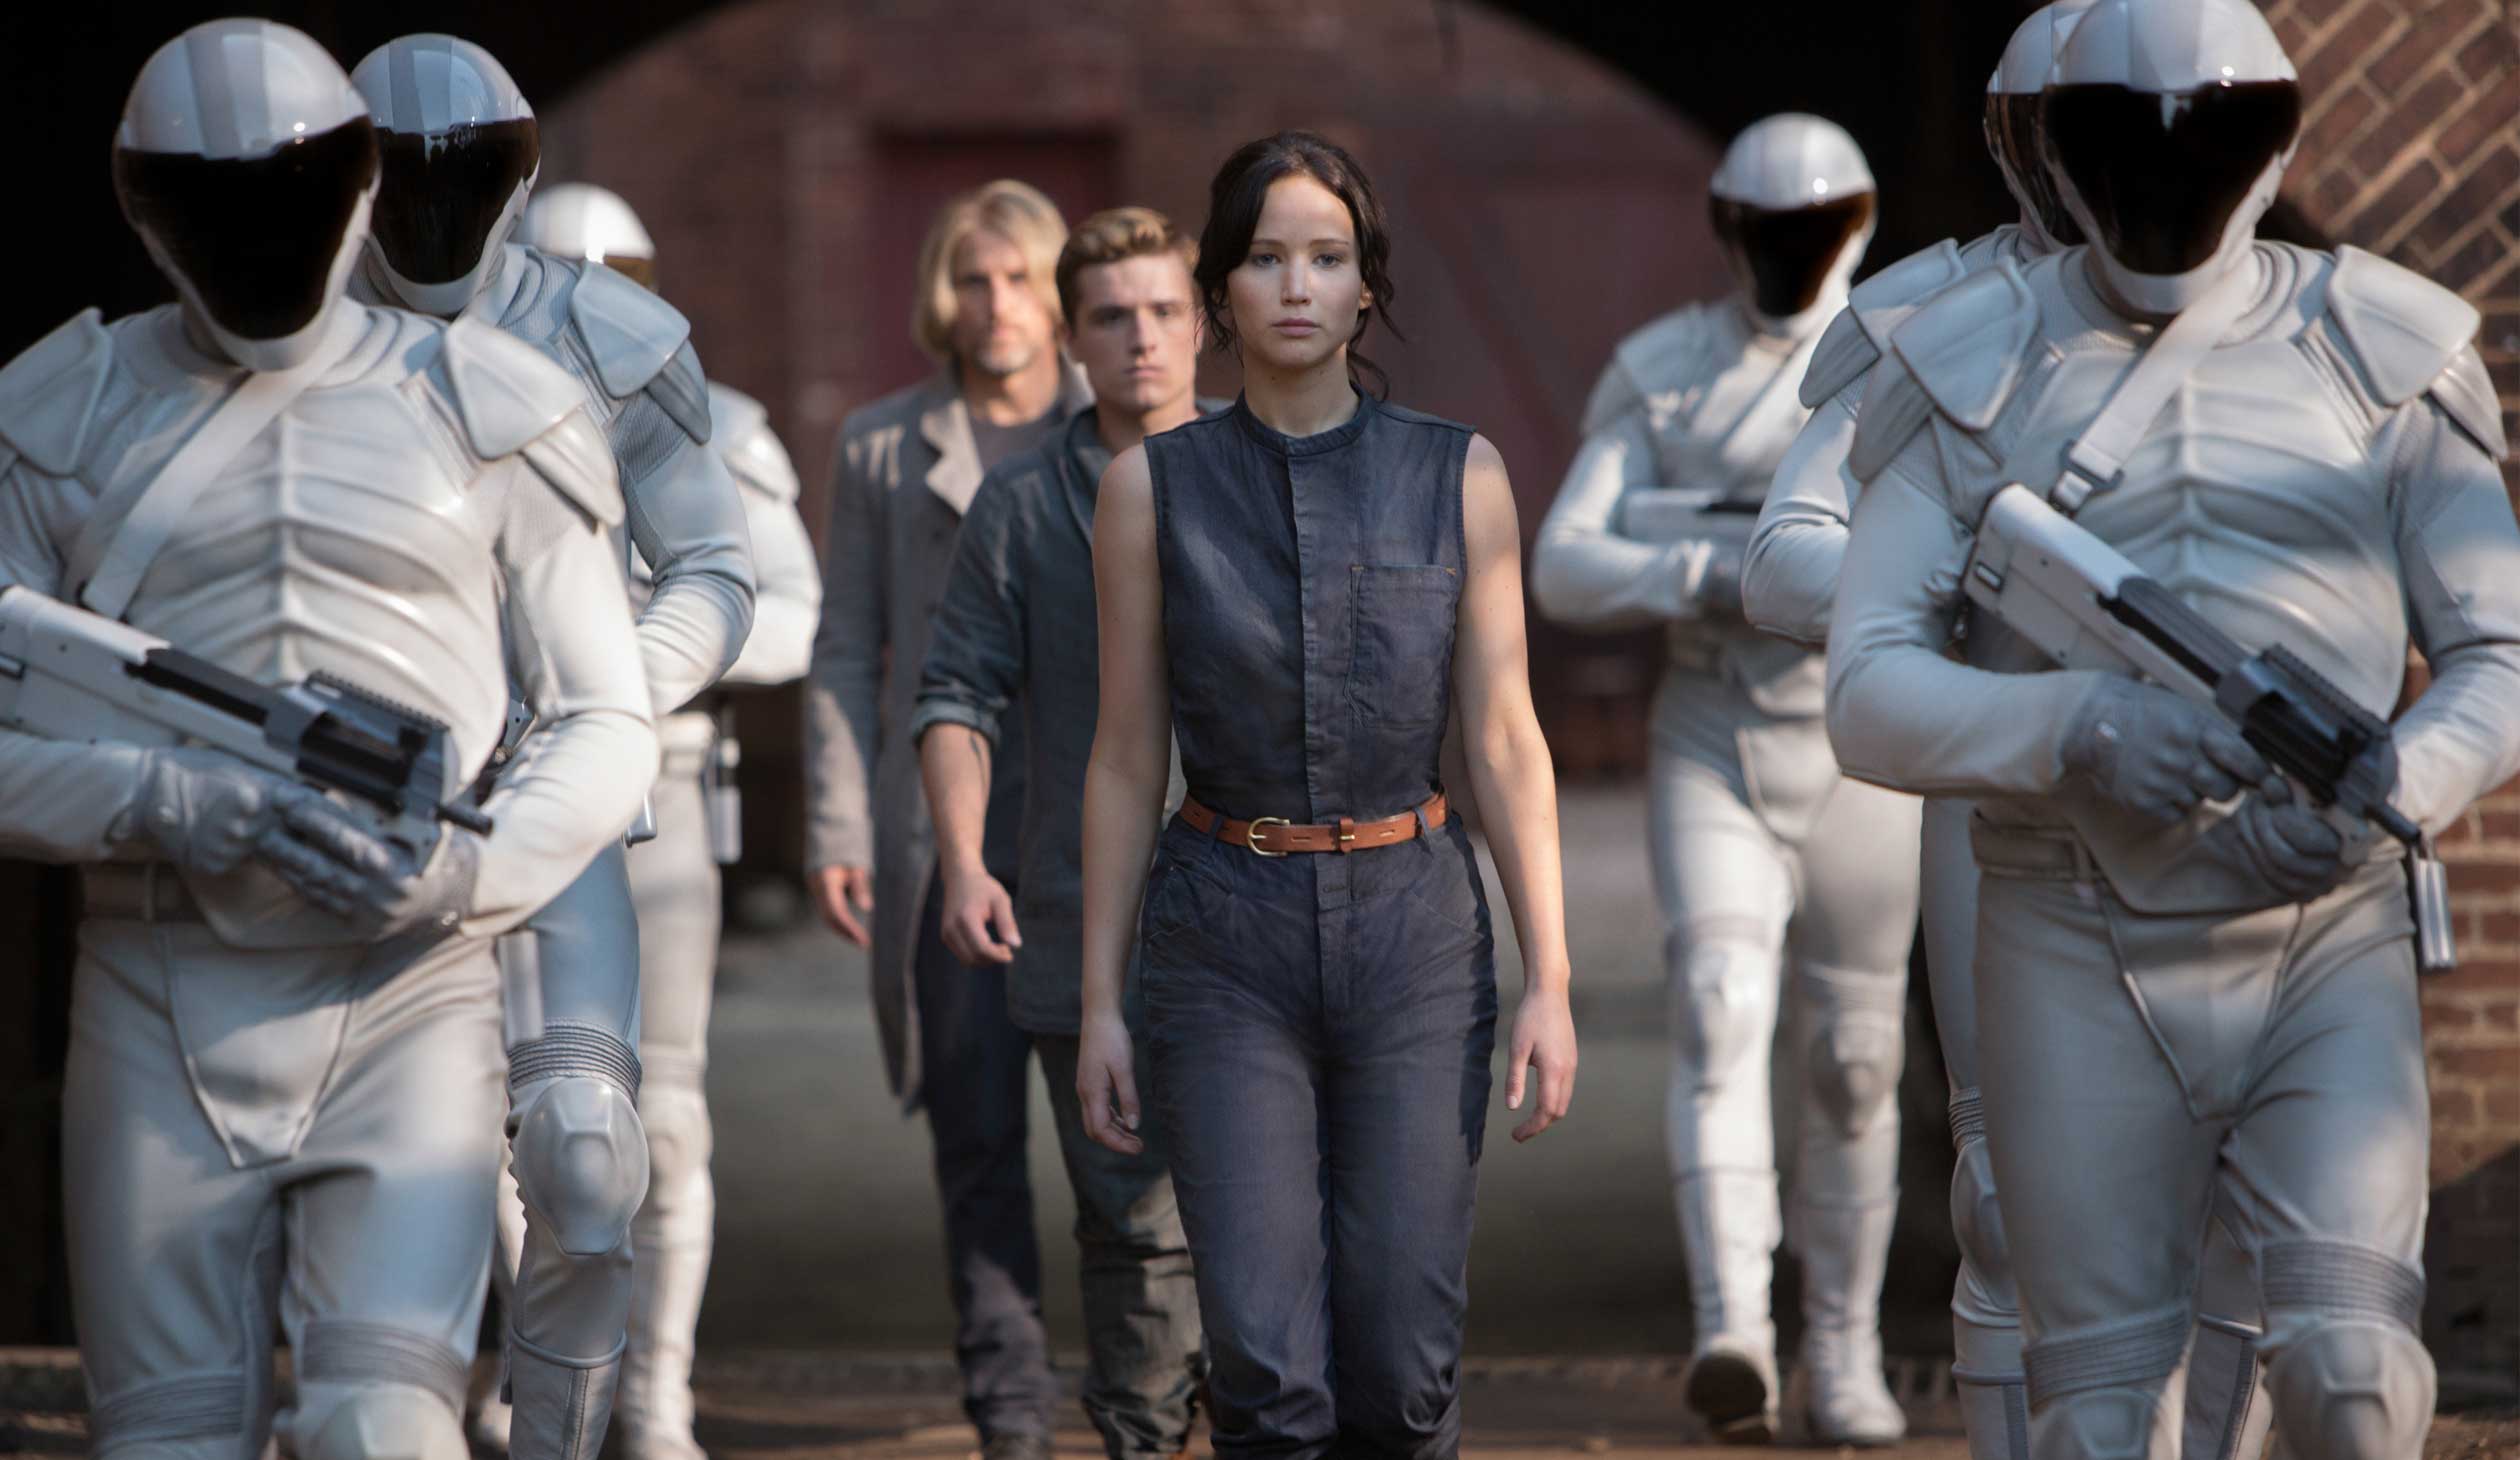 download the new for mac The Hunger Games: Catching Fire